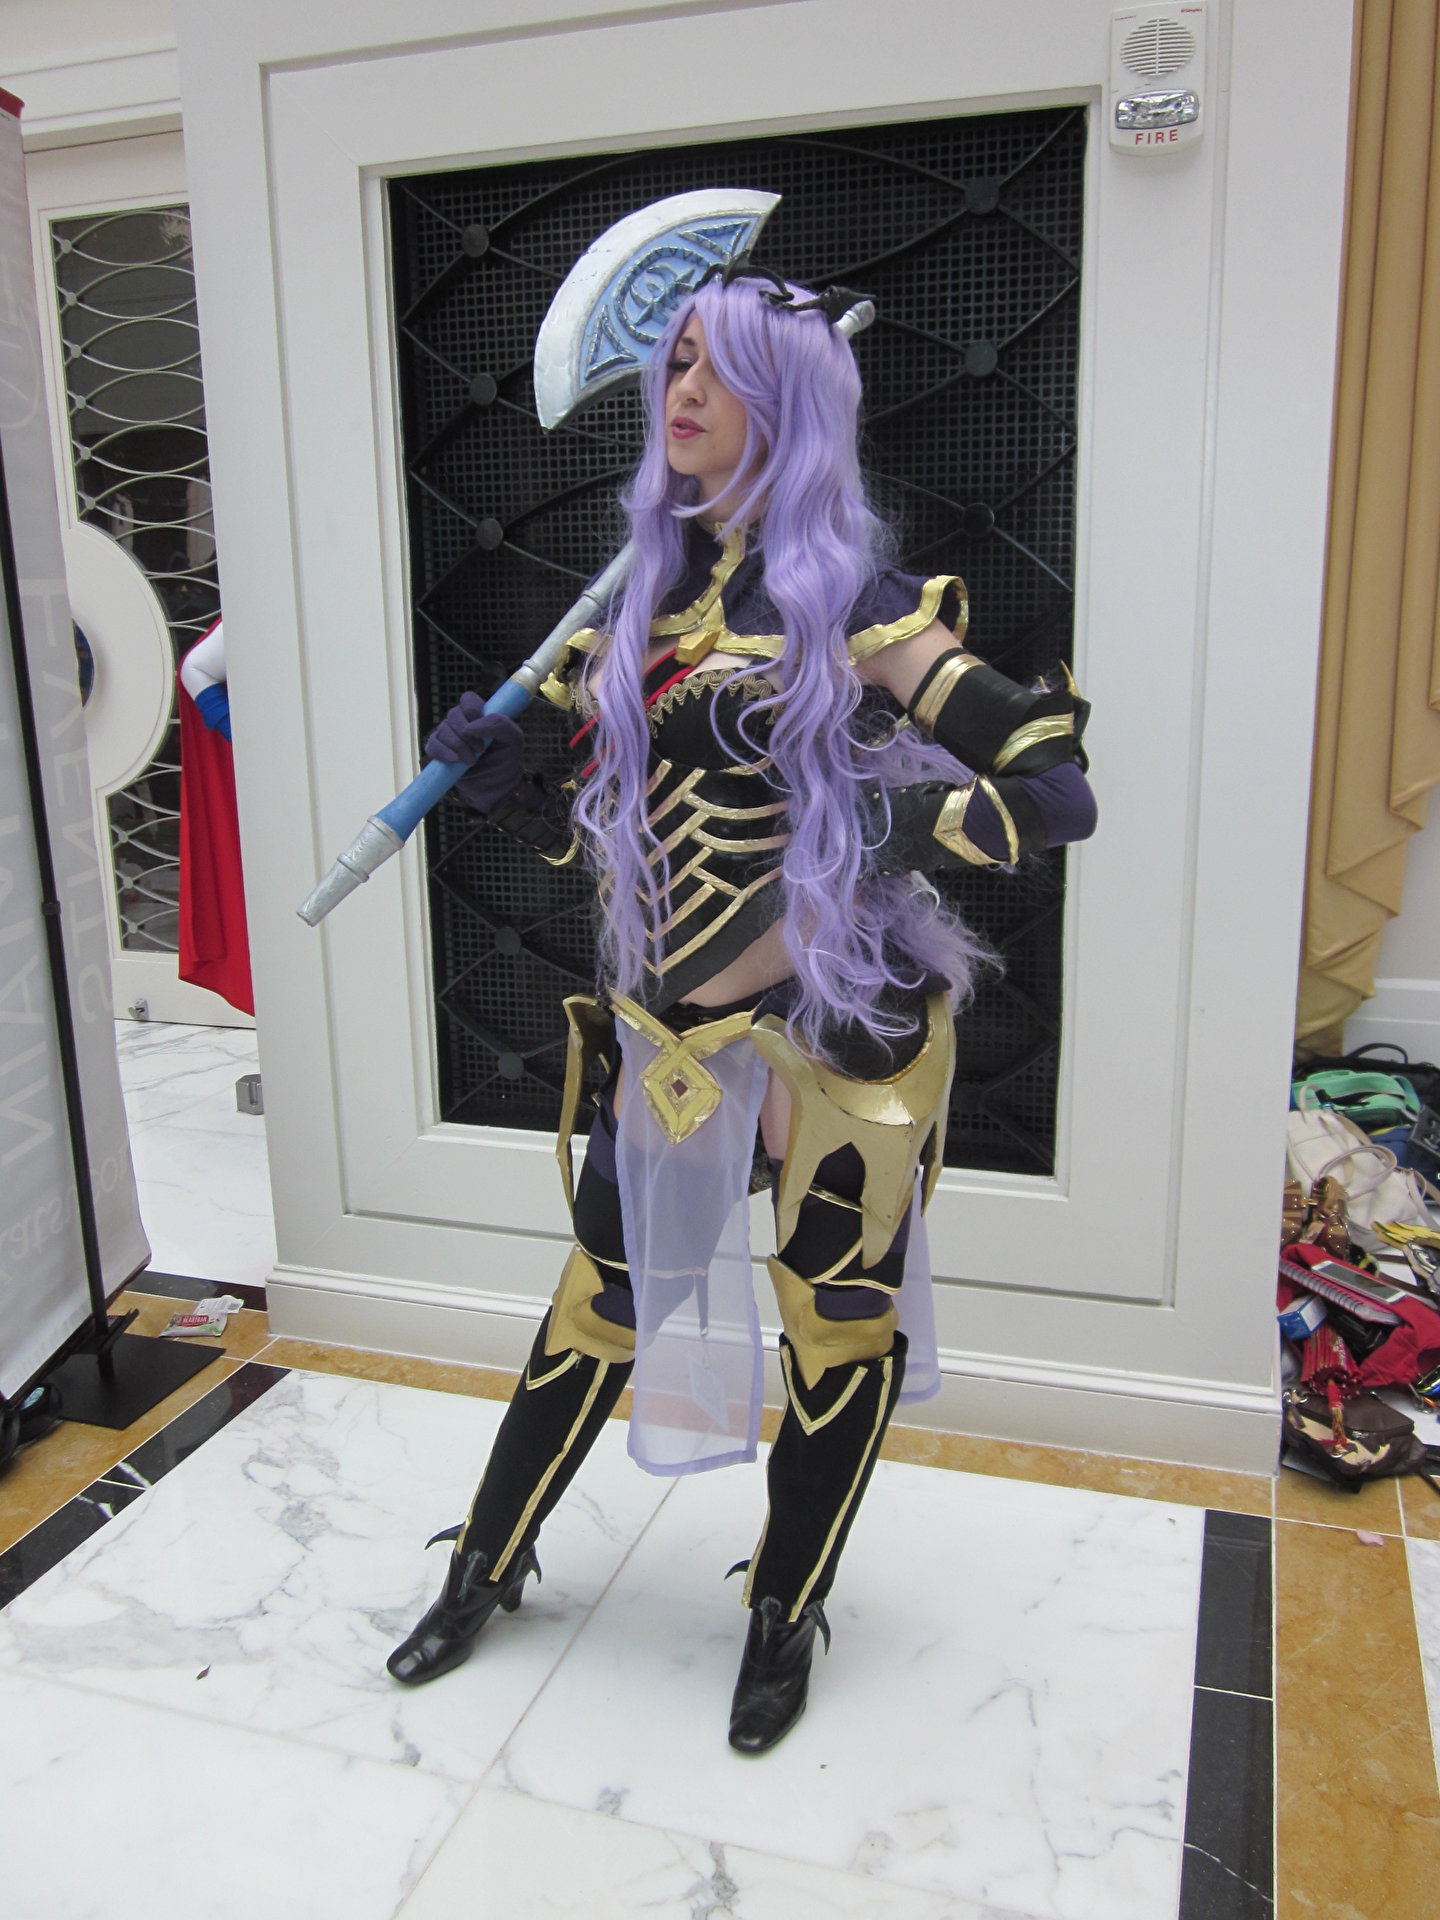 Cospix.net photo featuring GuiltyRose Cosplay